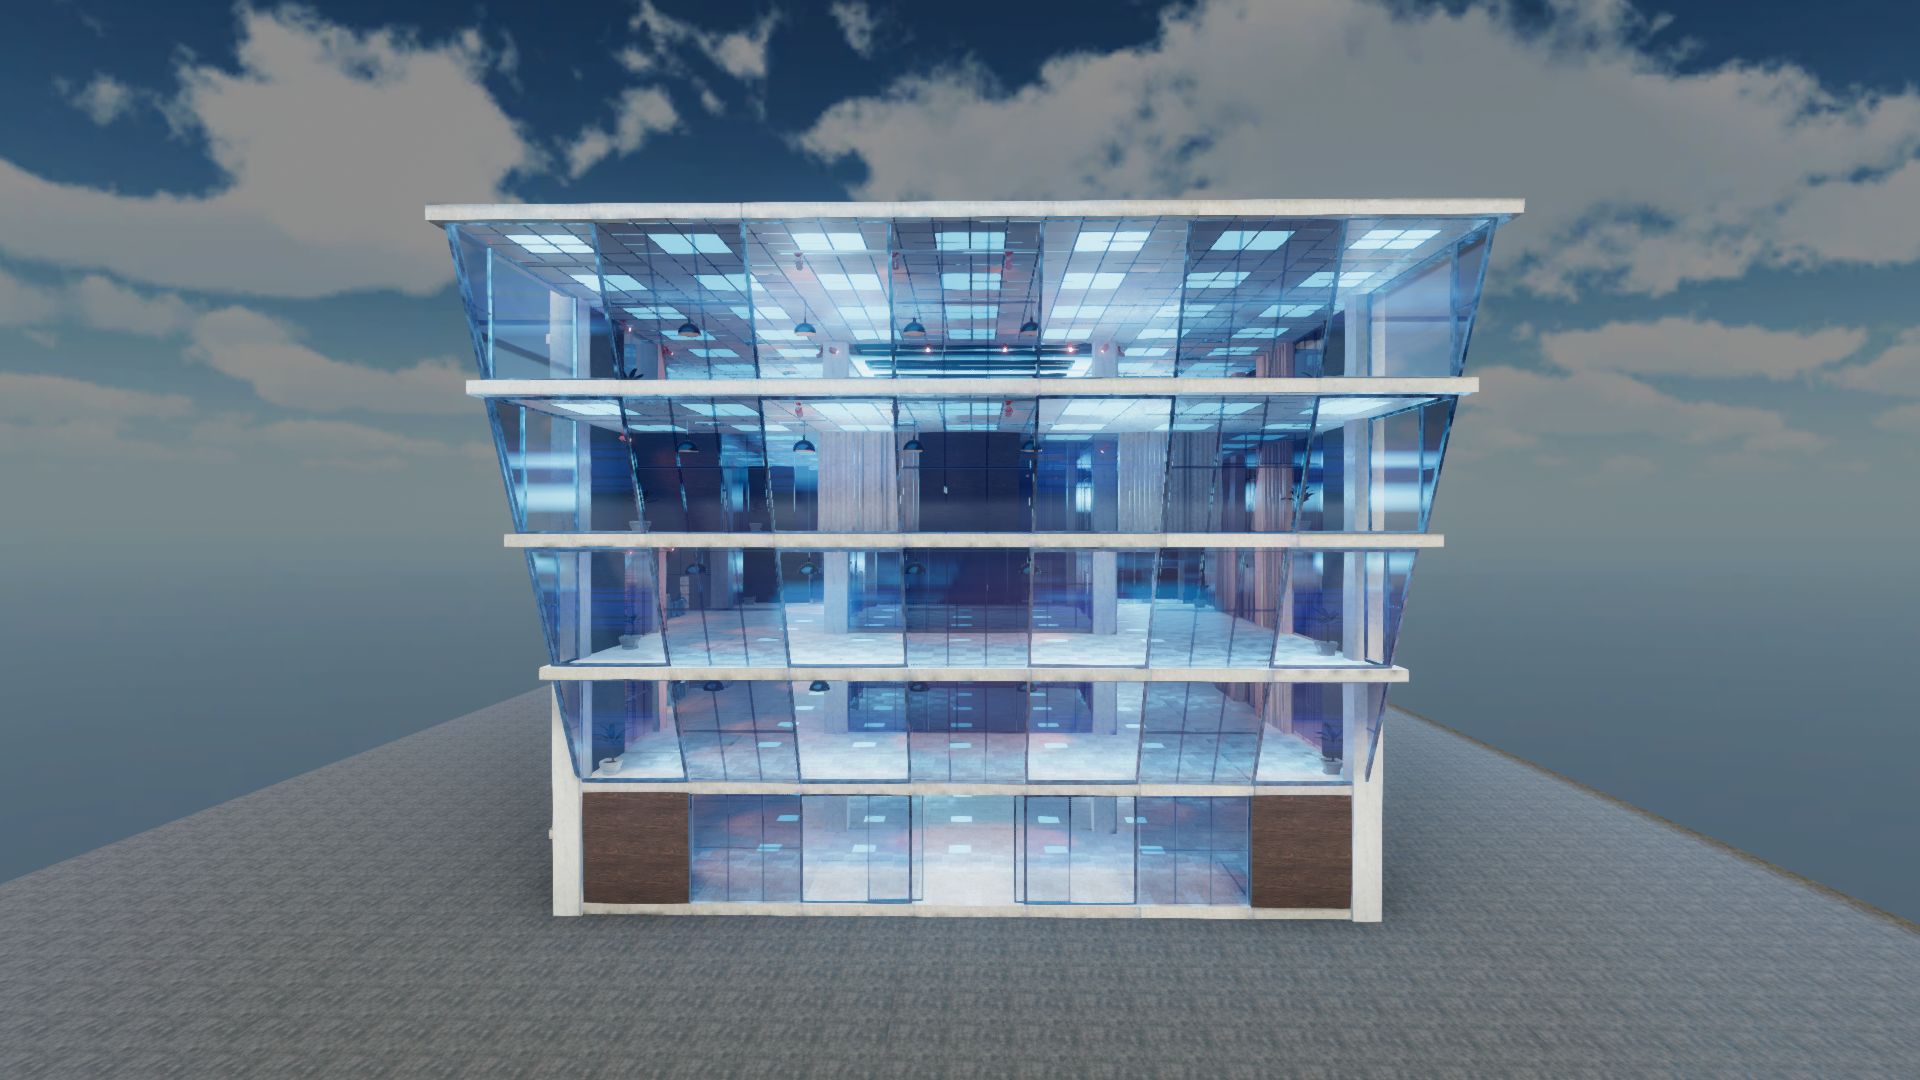 An image showing Modular Glass Building asset pack, created with Unity Engine